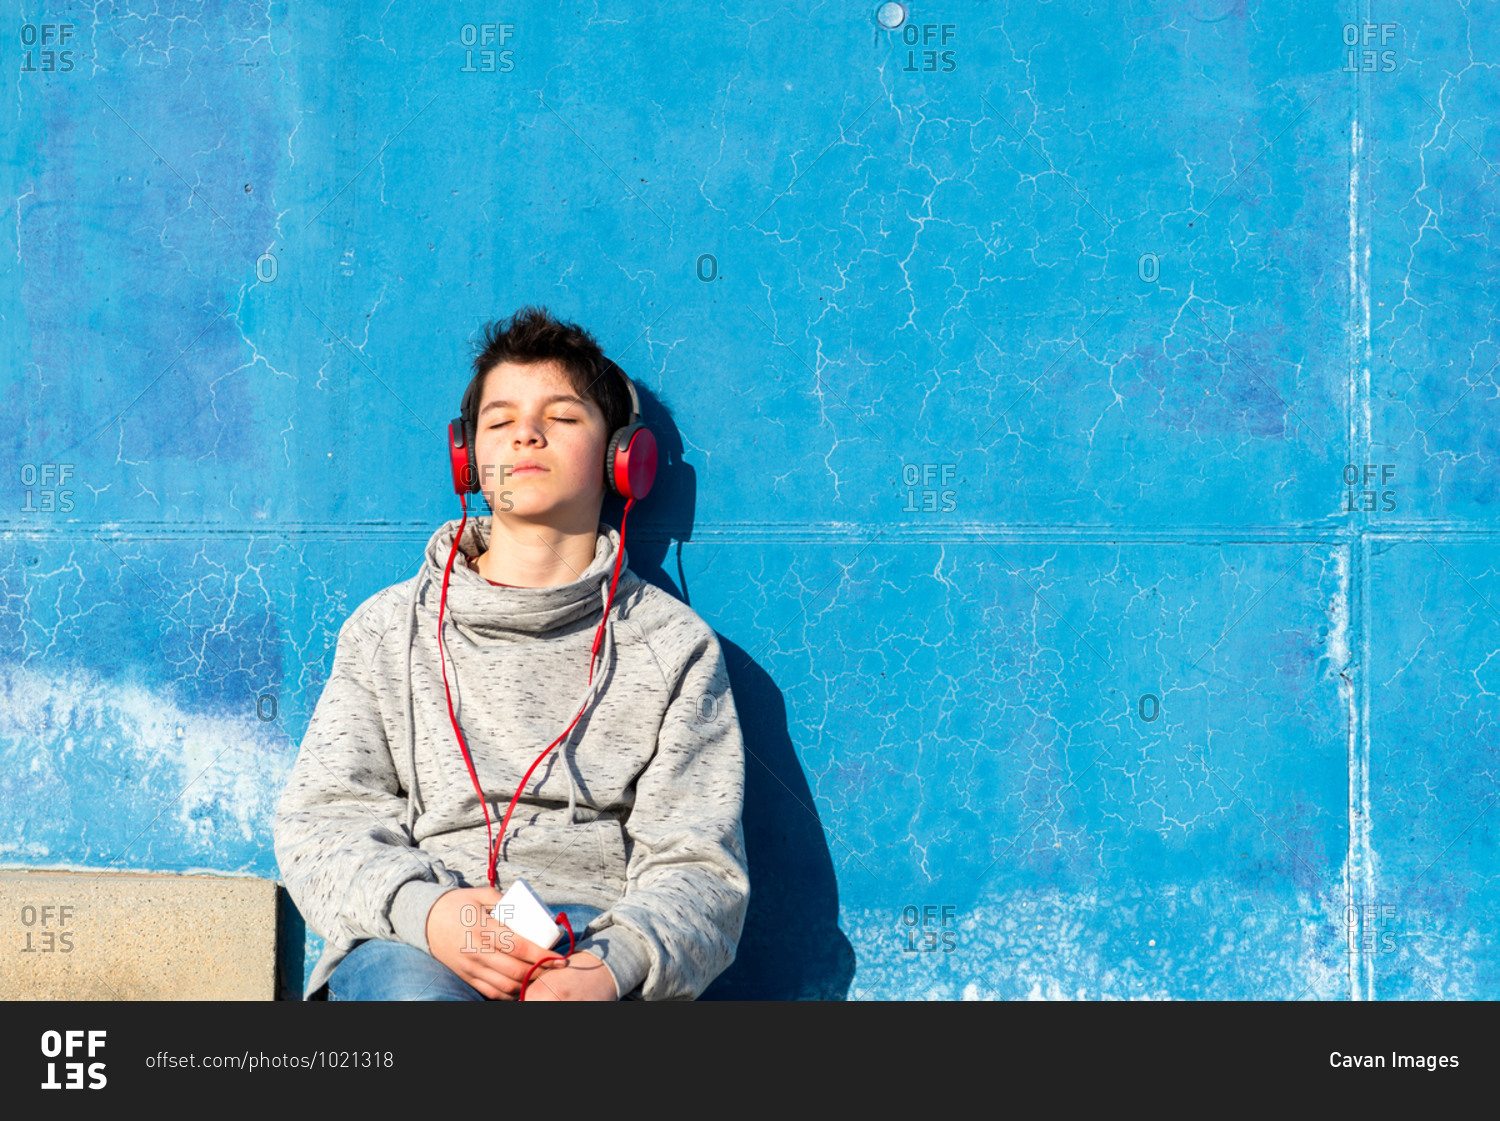 Teenager with headphones listening music while sitting on staircase.